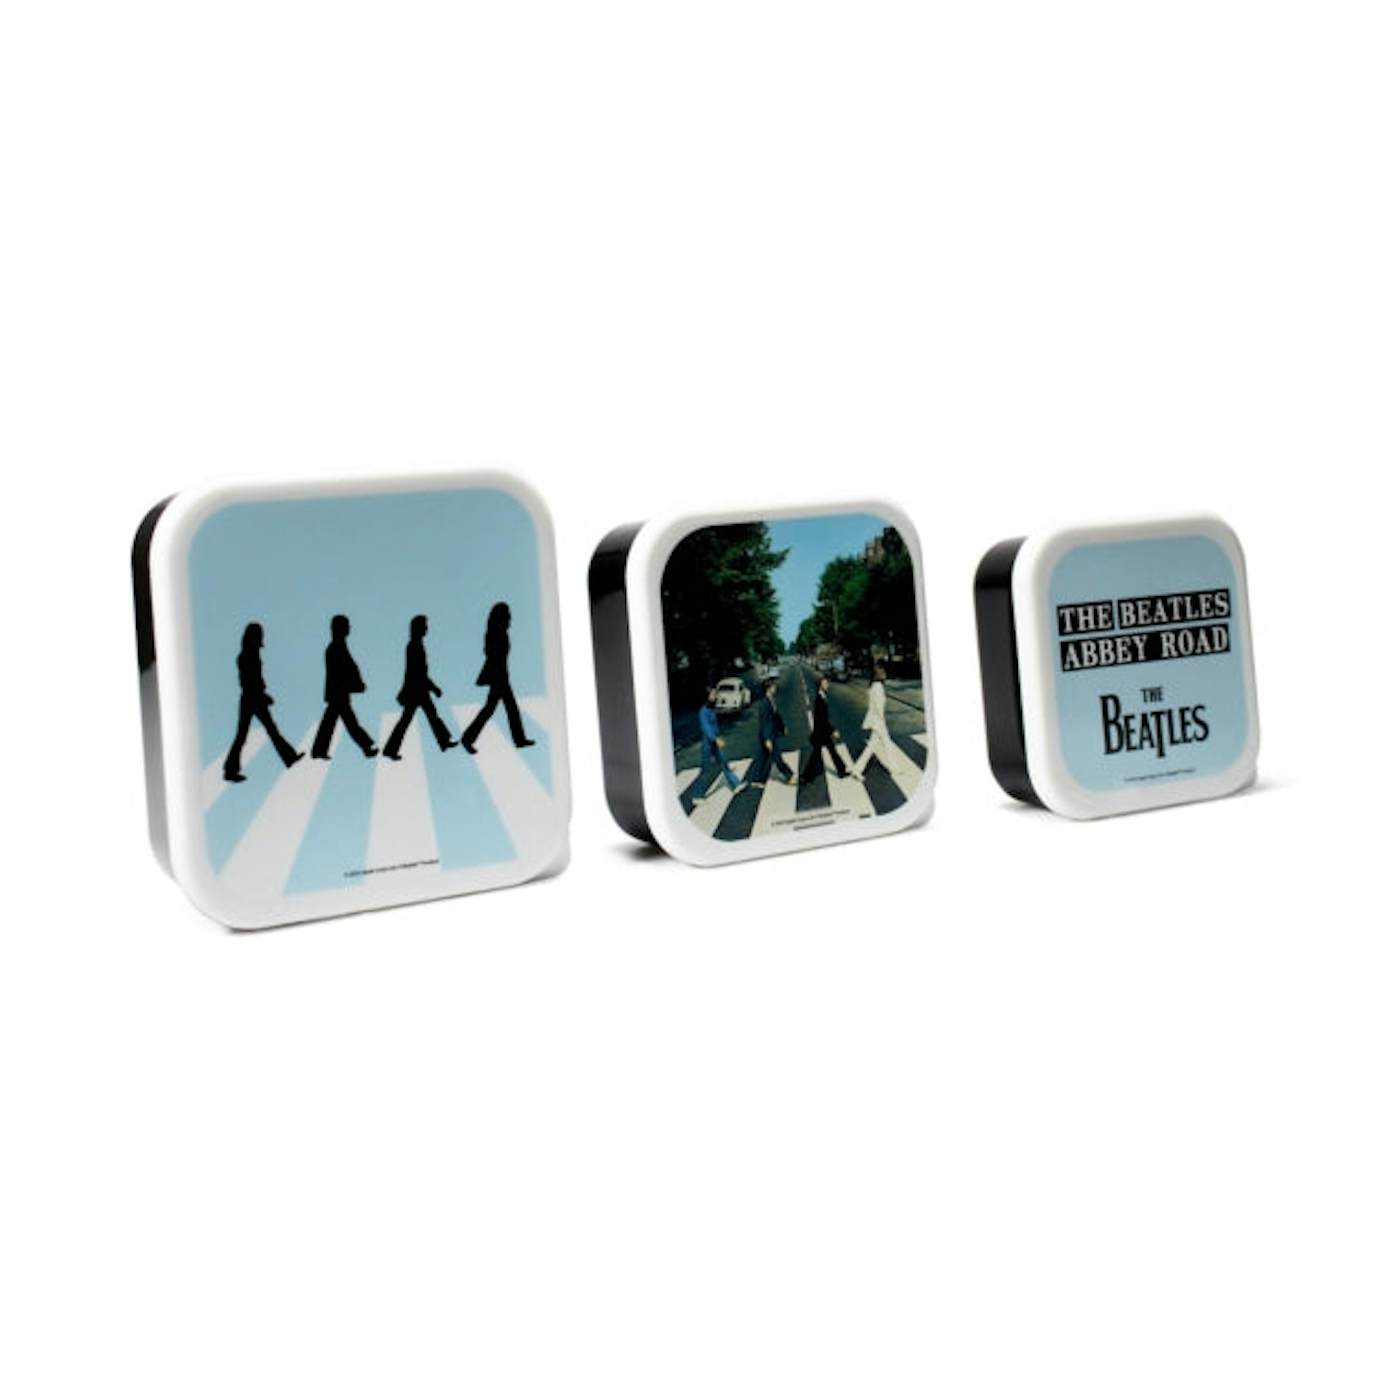 The Beatles Lunch Box - Snack Boxes Set of 3 - (Abbey Road)